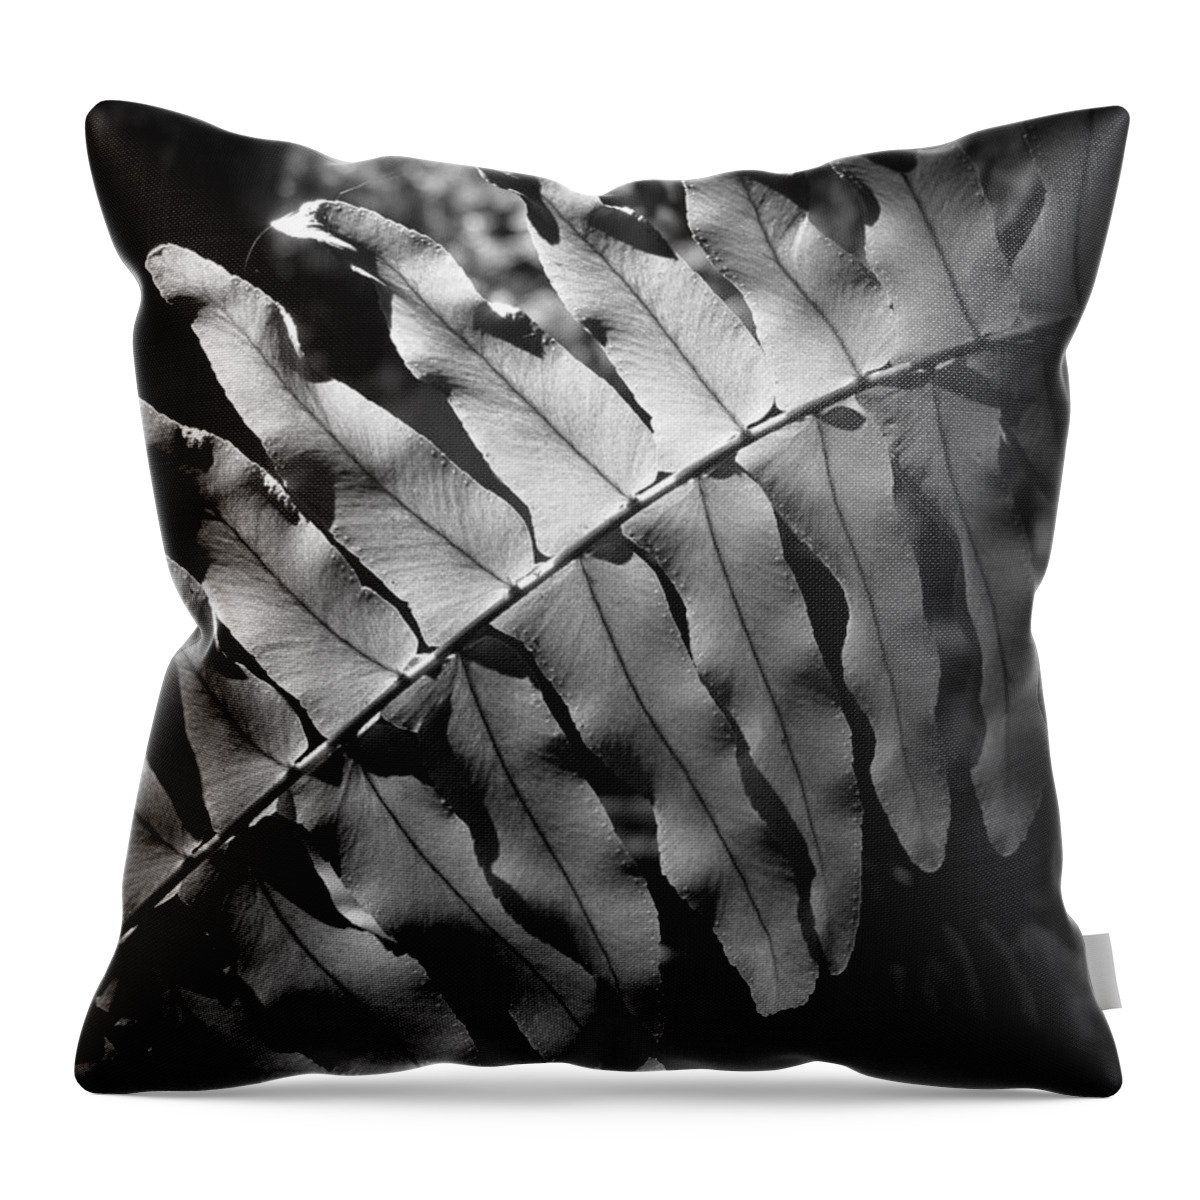 Fern Throw Pillow featuring the photograph Abstract - Botanical Light Play by Richard Reeve